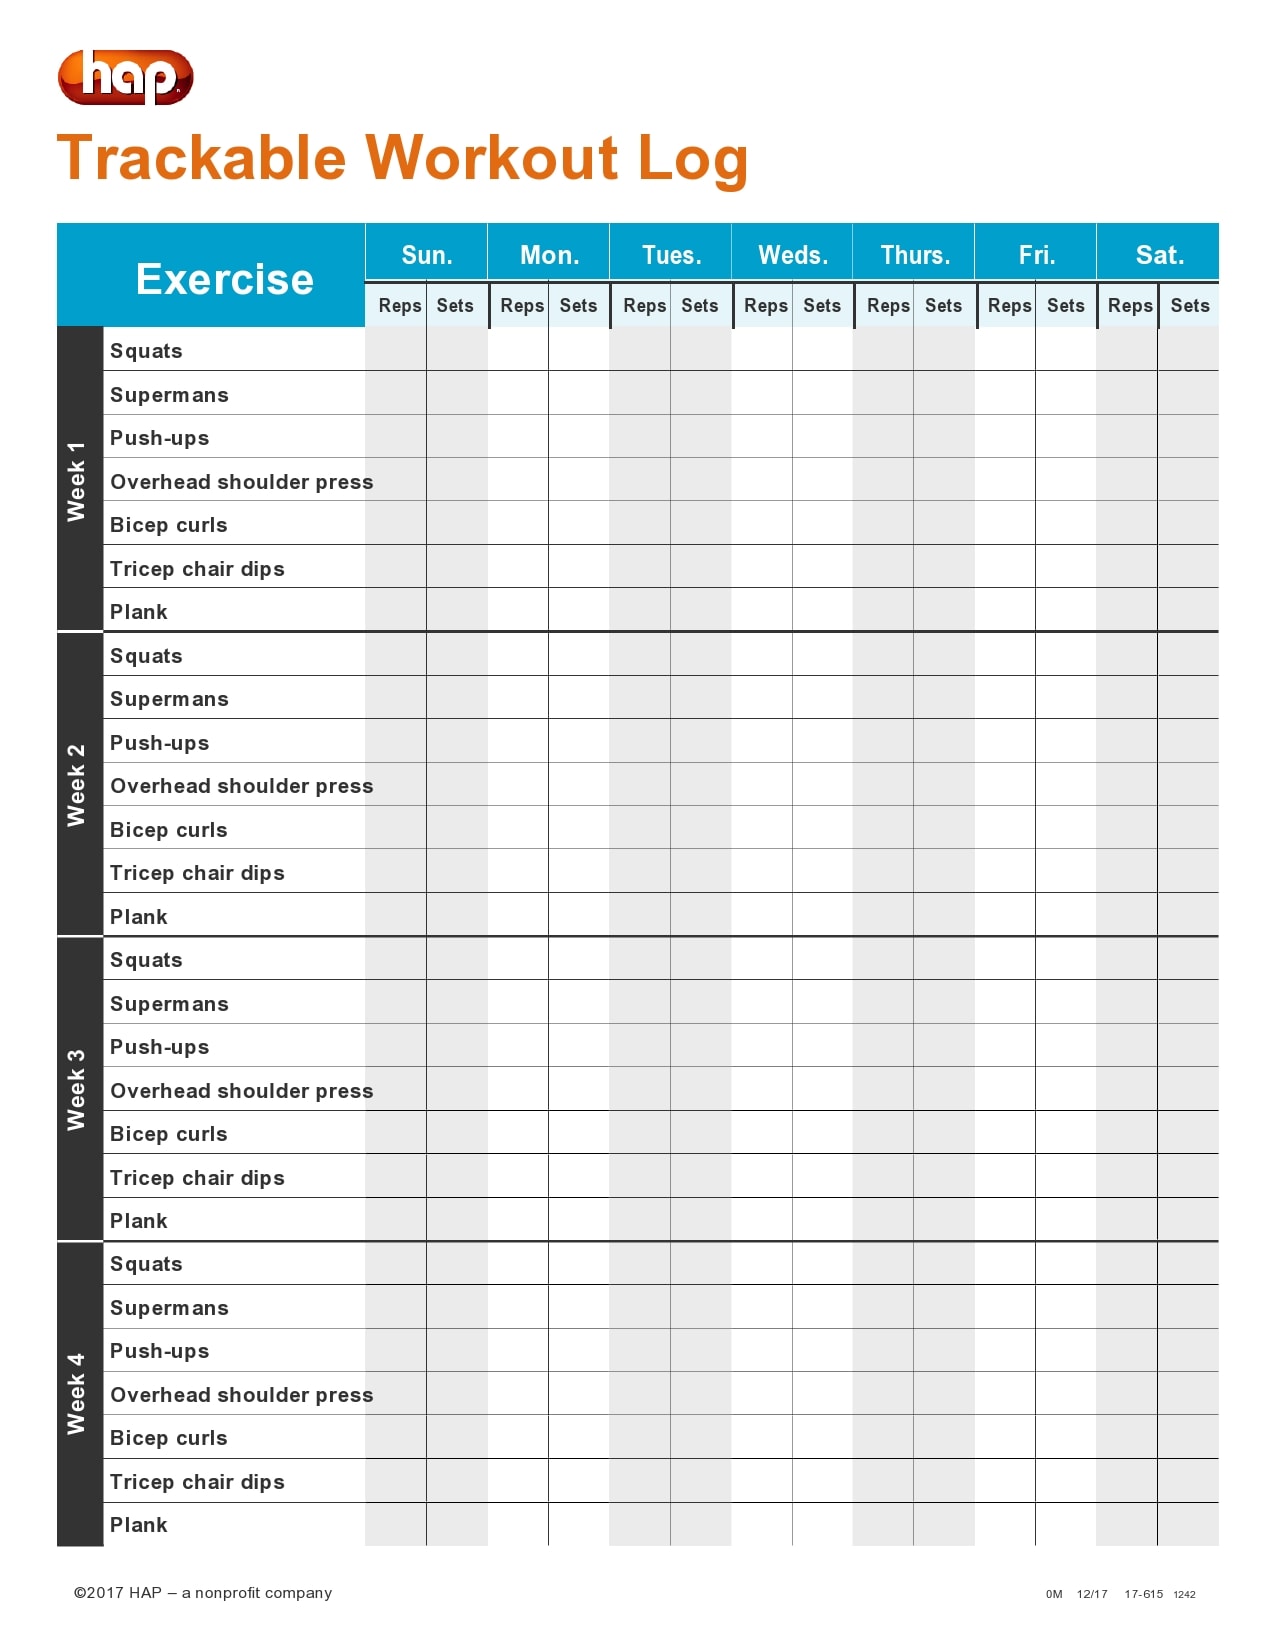 30 Useful Workout Log Templates (Free Spreadsheets)